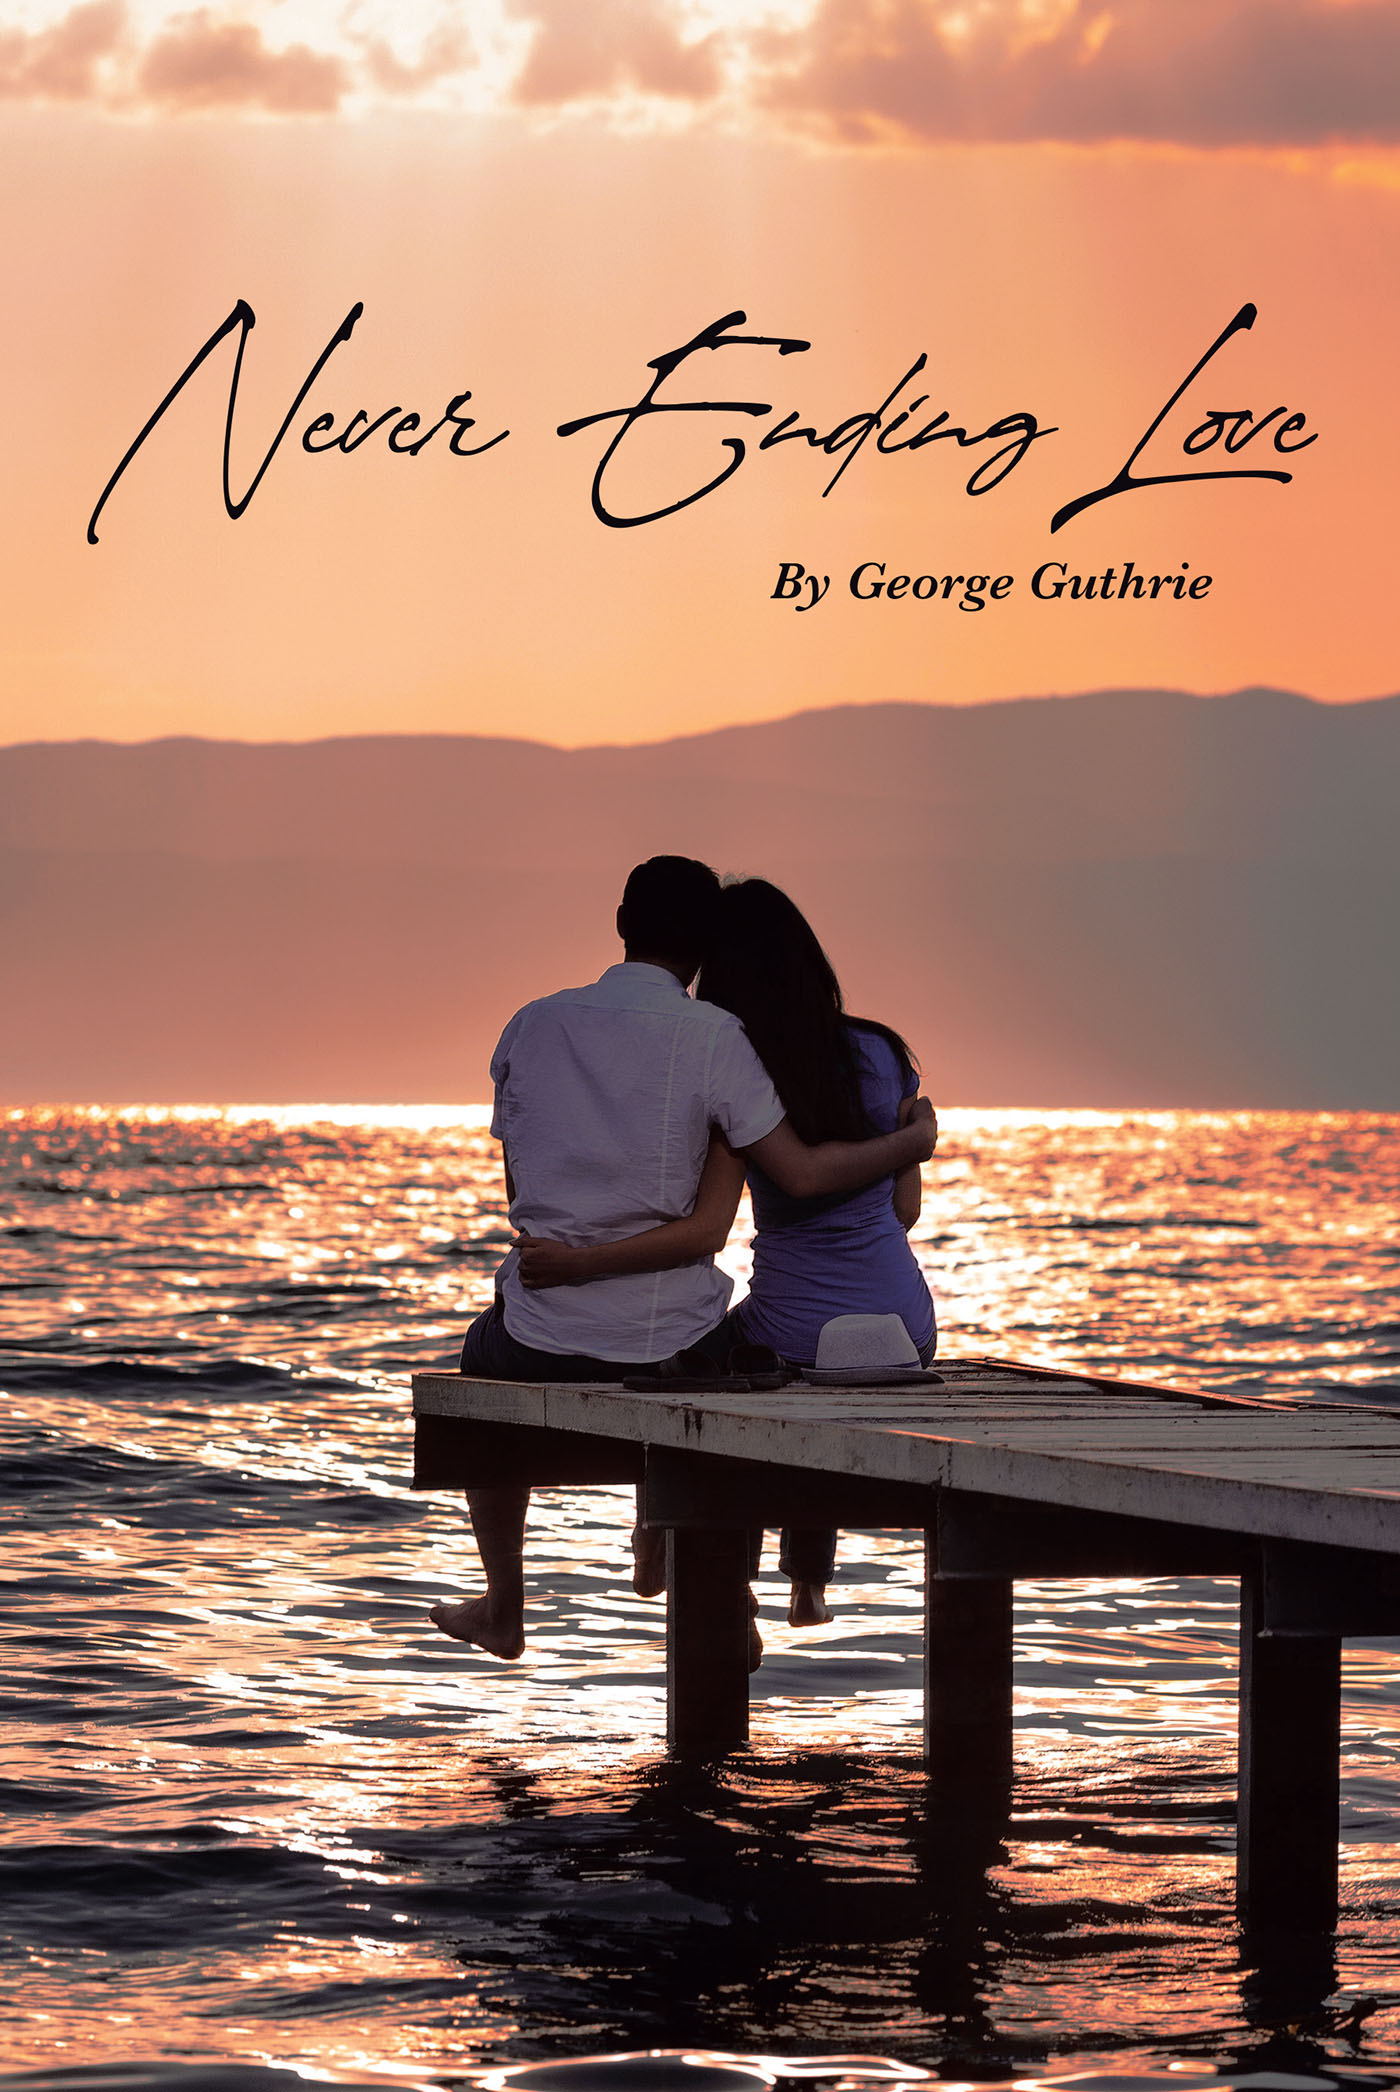 George Guthrie’s New Book, "Never Ending Love," is an Expressive Collection of Poetry That Paints a Compressive Picture of the Beautiful Complexity of Love